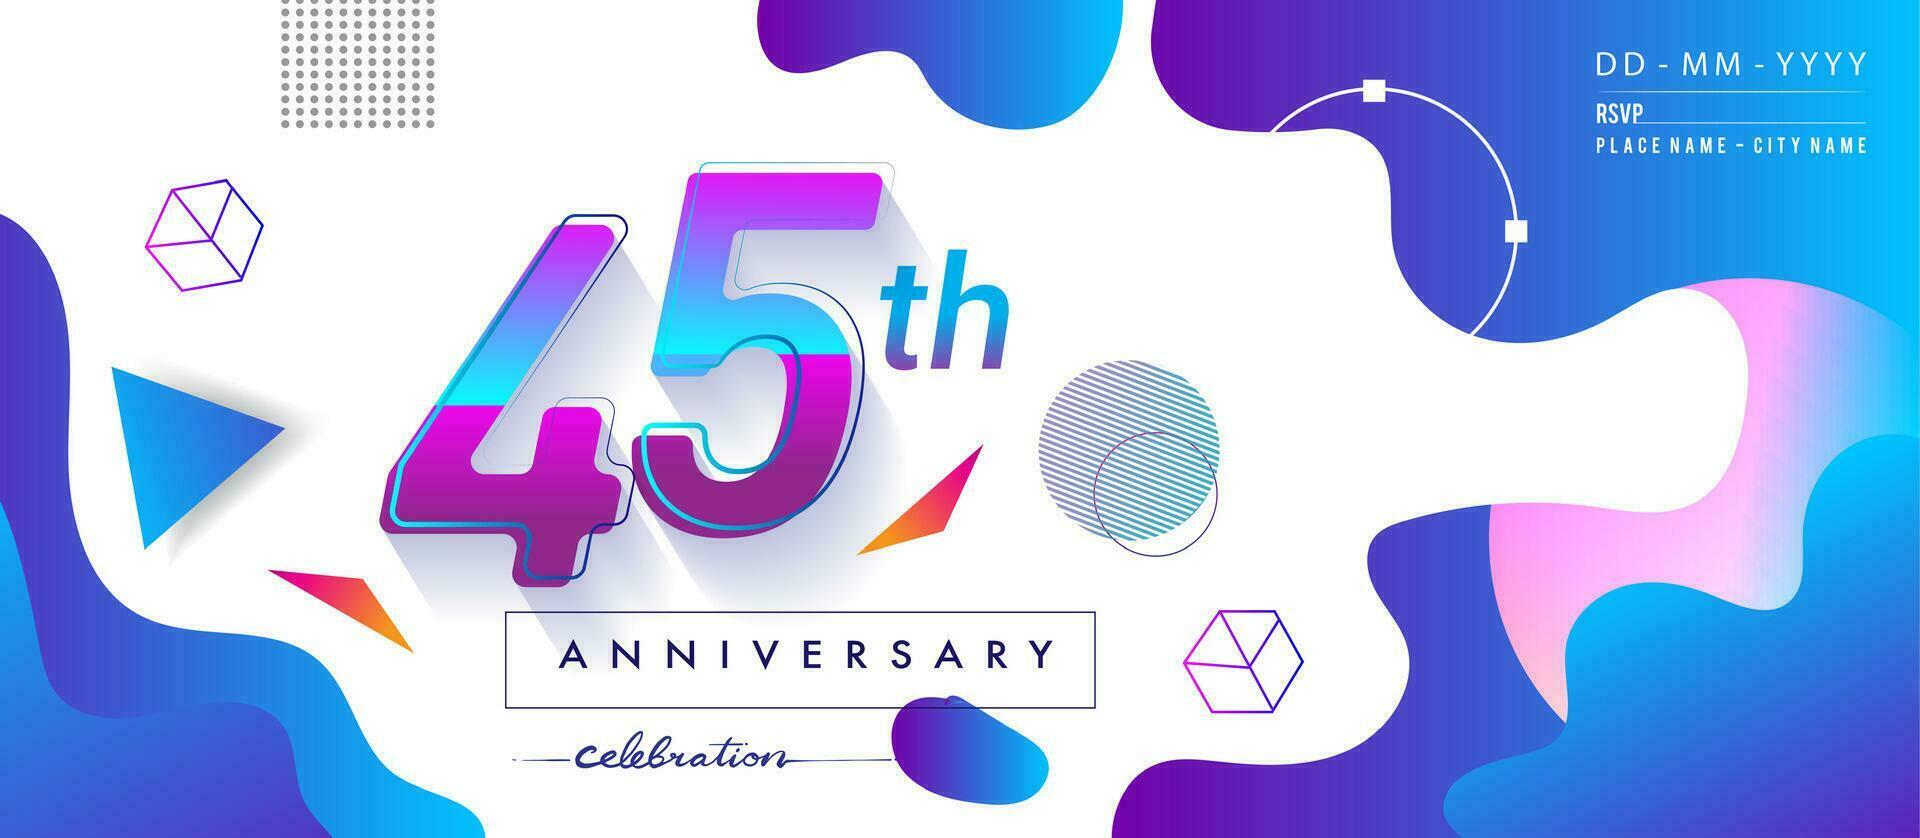 45th years anniversary logo, vector design birthday celebration with colorful geometric background and circles shape.